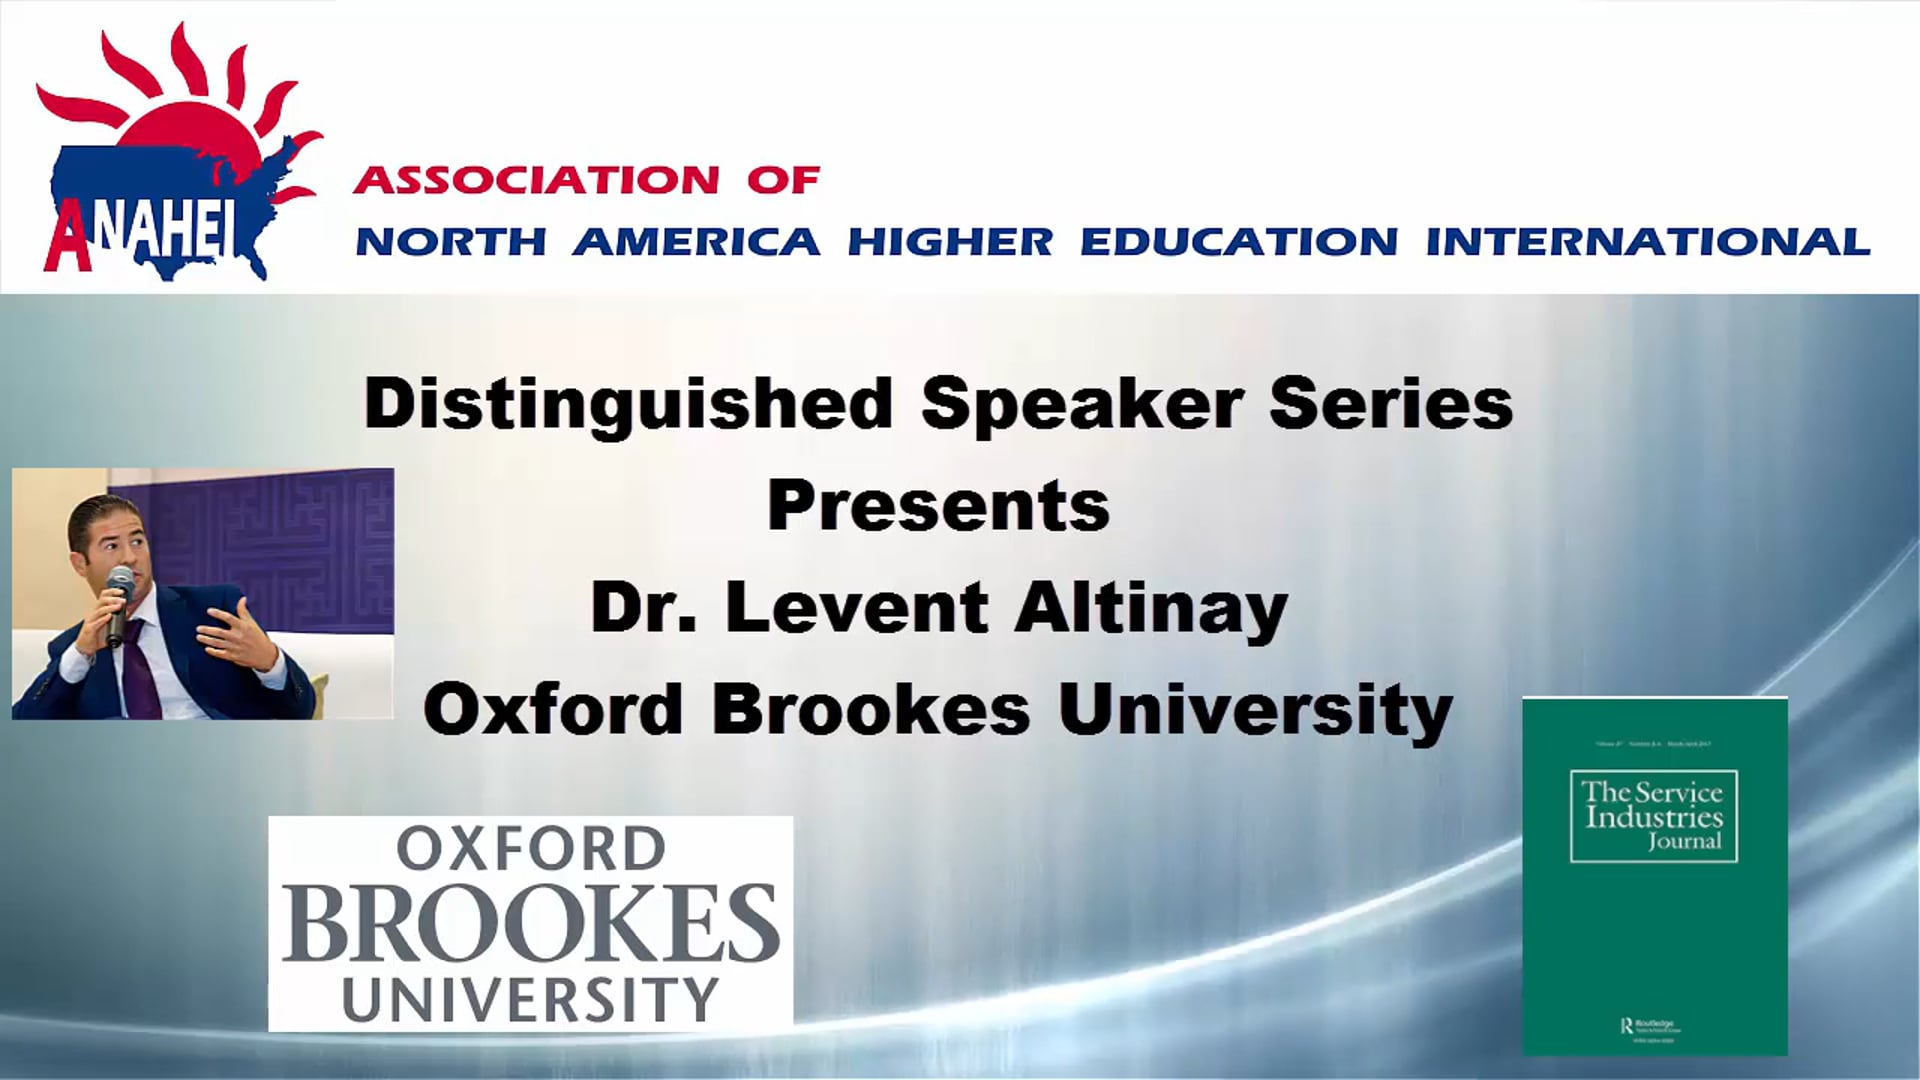 ANAHEI Distinguished Lecture Series: Prof. Levent Altinay Oxford Brookes University